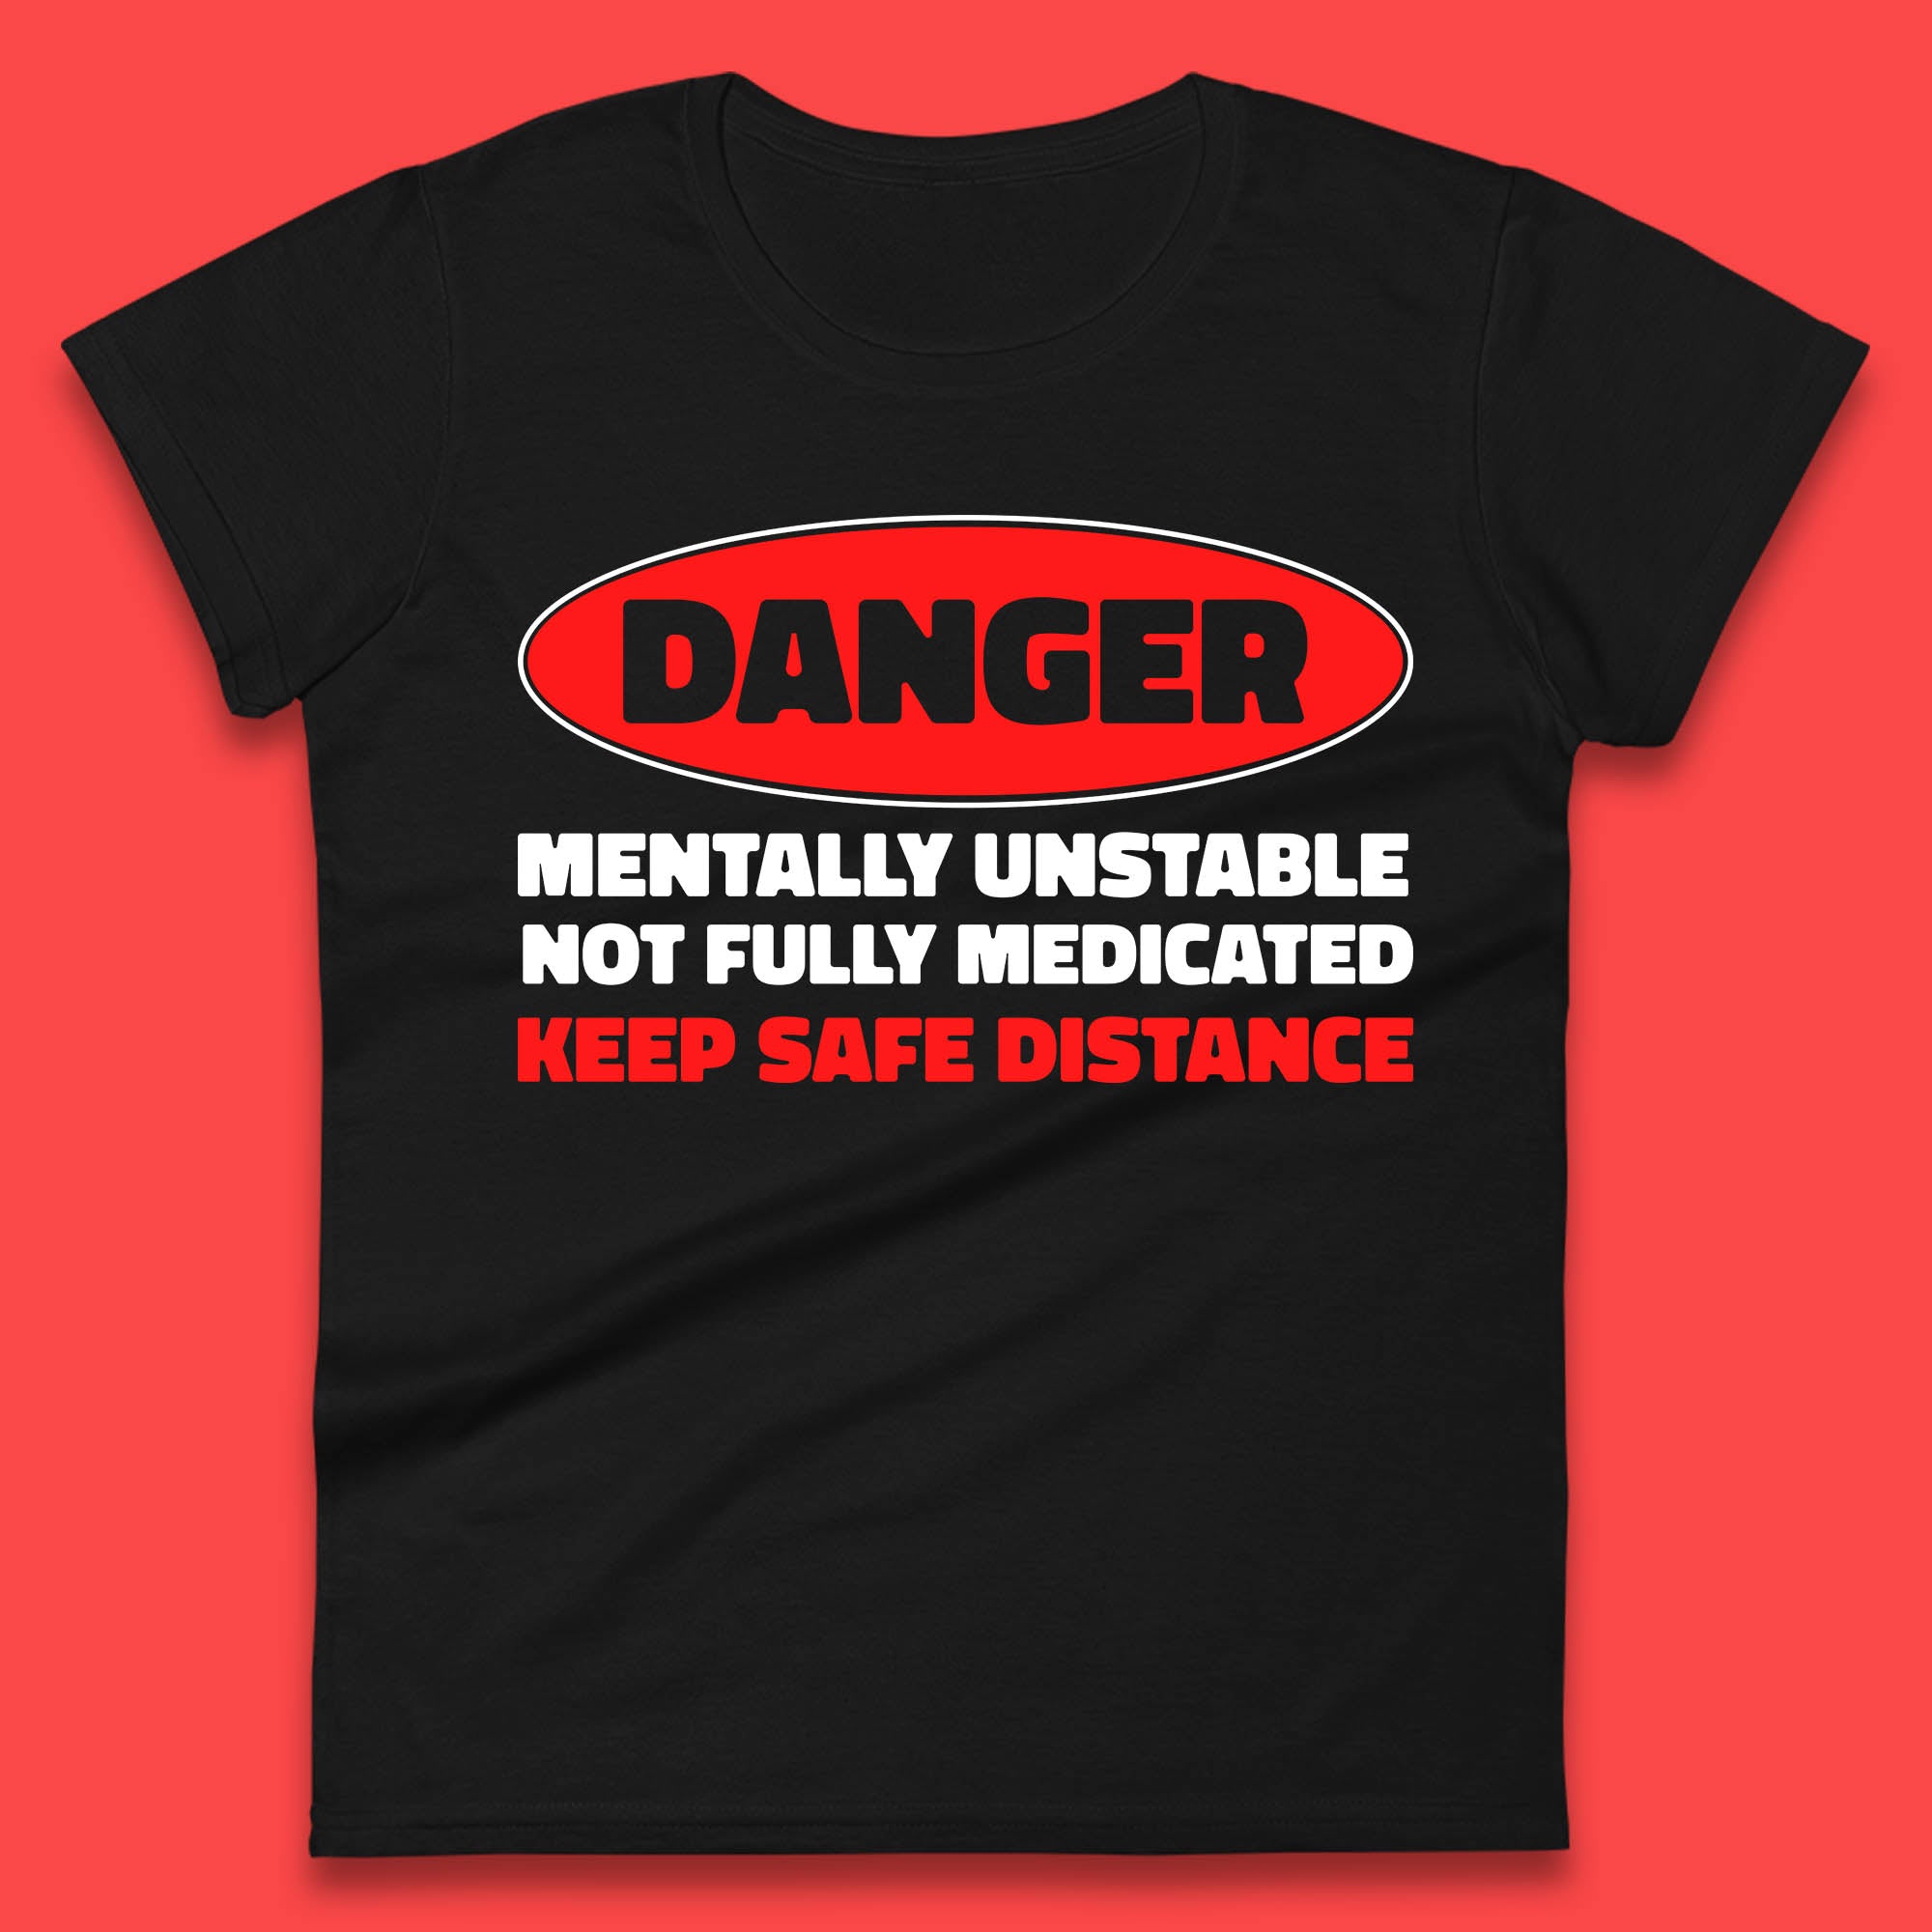 Danger Mentally Unstable Not Fully Medicated Keep Safe Distance Funny Saying Quote Womens Tee Top